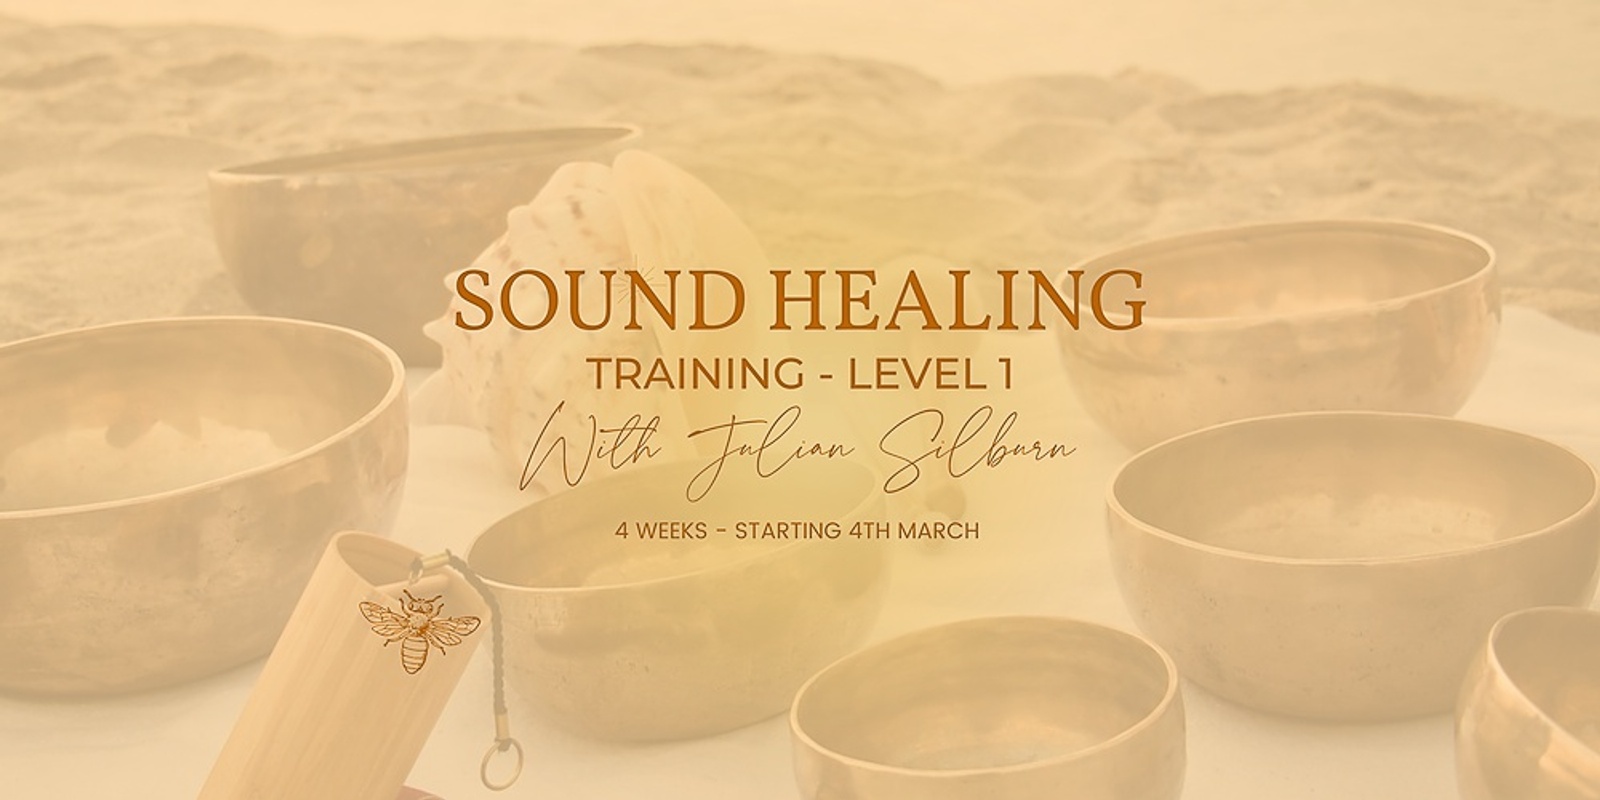 Banner image for Sound Healing Training - Level 1 with Julian Silburn